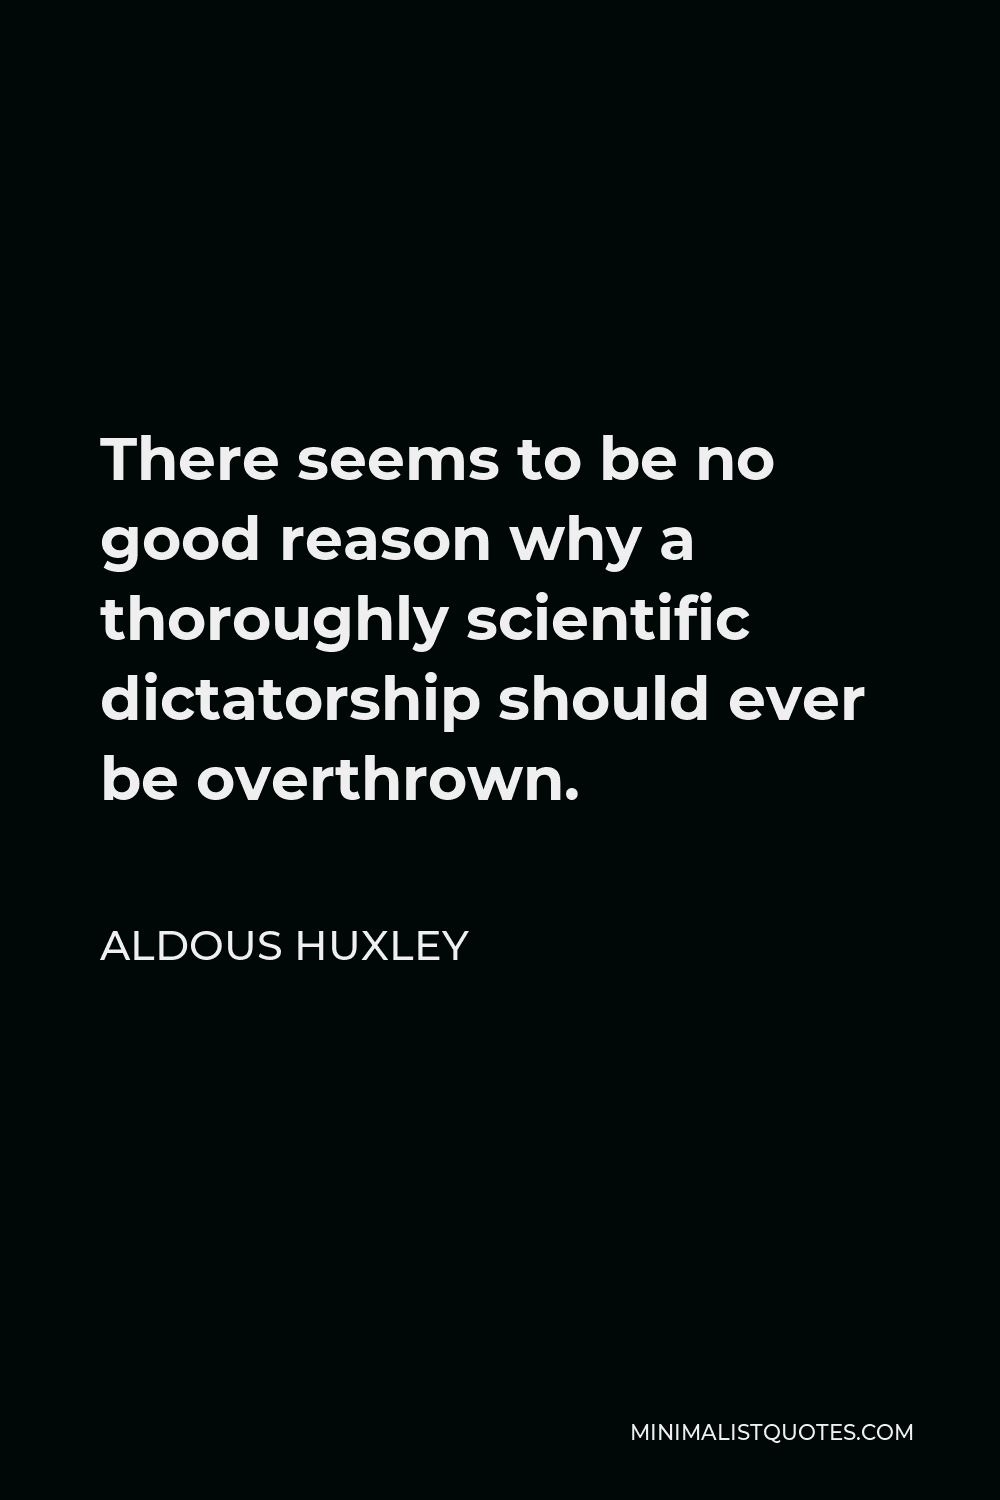 Aldous Huxley Quote - There seems to be no good reason why a thoroughly scientific dictatorship should ever be overthrown.